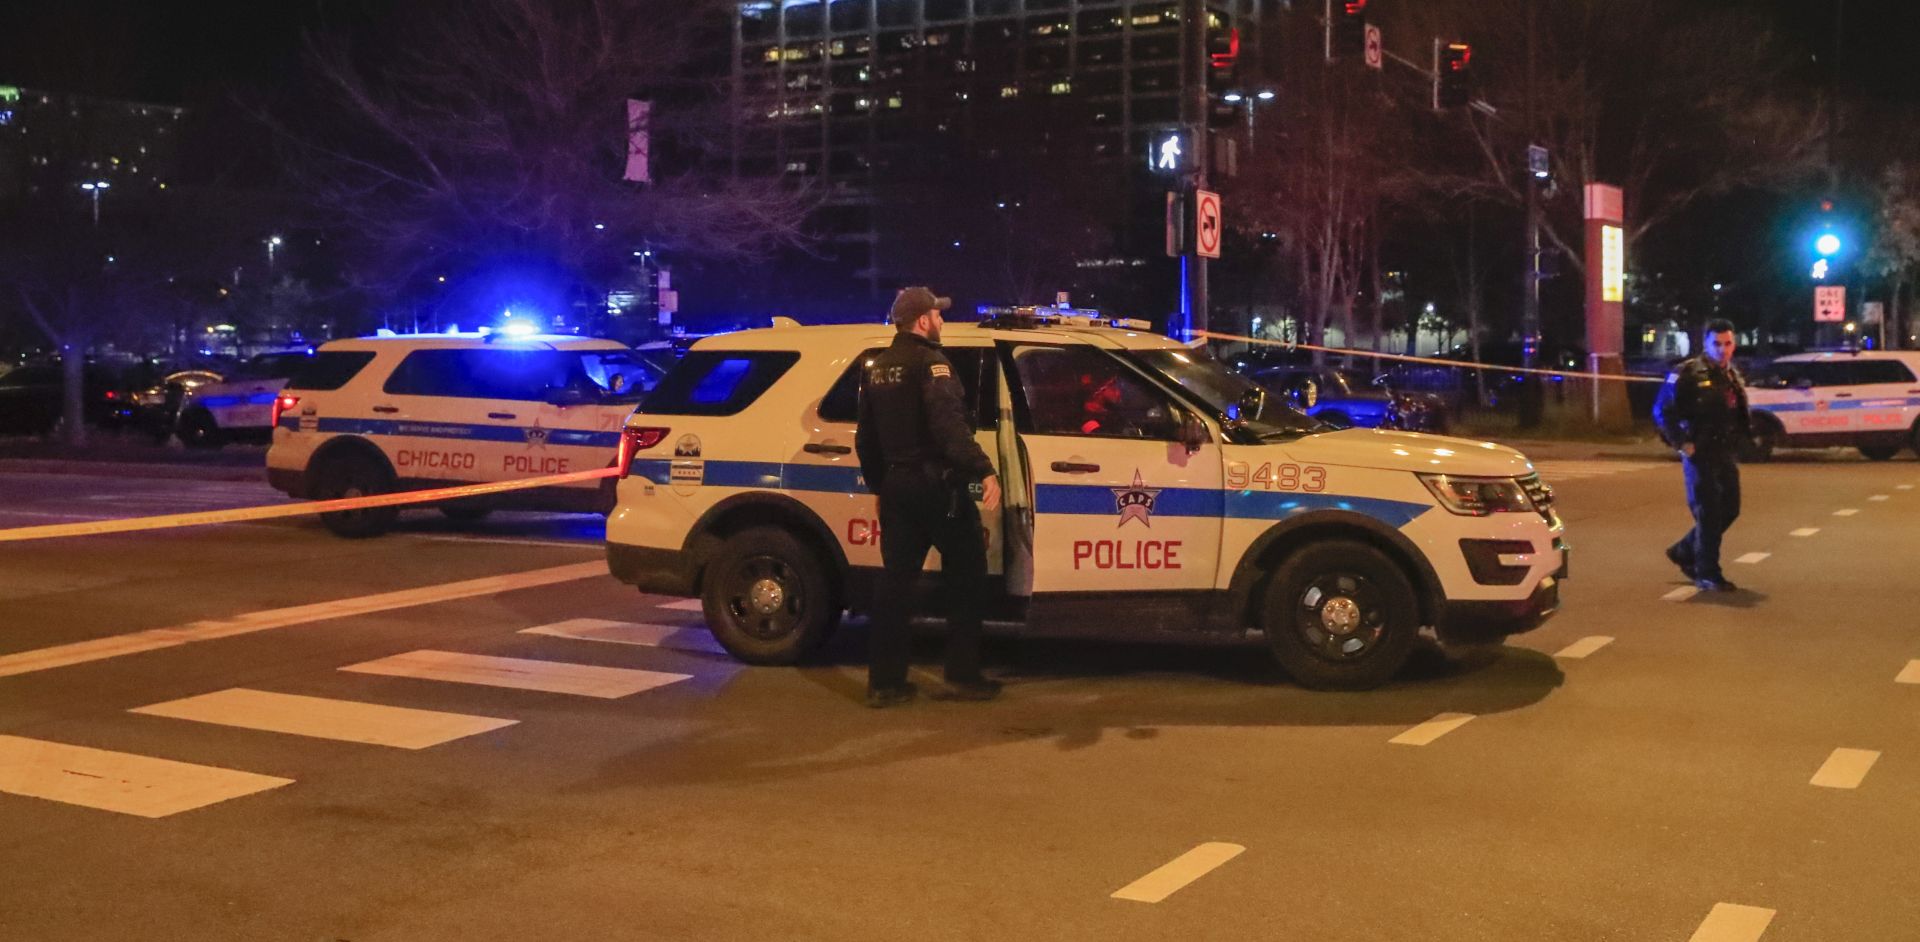 epa07178477 Chicago police officers control traffic at the scene of a shooting at Mercy Hospital and Medical Center in Chicago, Illinois, USA, 19 November 2018. According to reports a man entered the hospital and began shooting, killing two employees and a Chicago police officer before being killed by police.  EPA/TANNEN MAURY